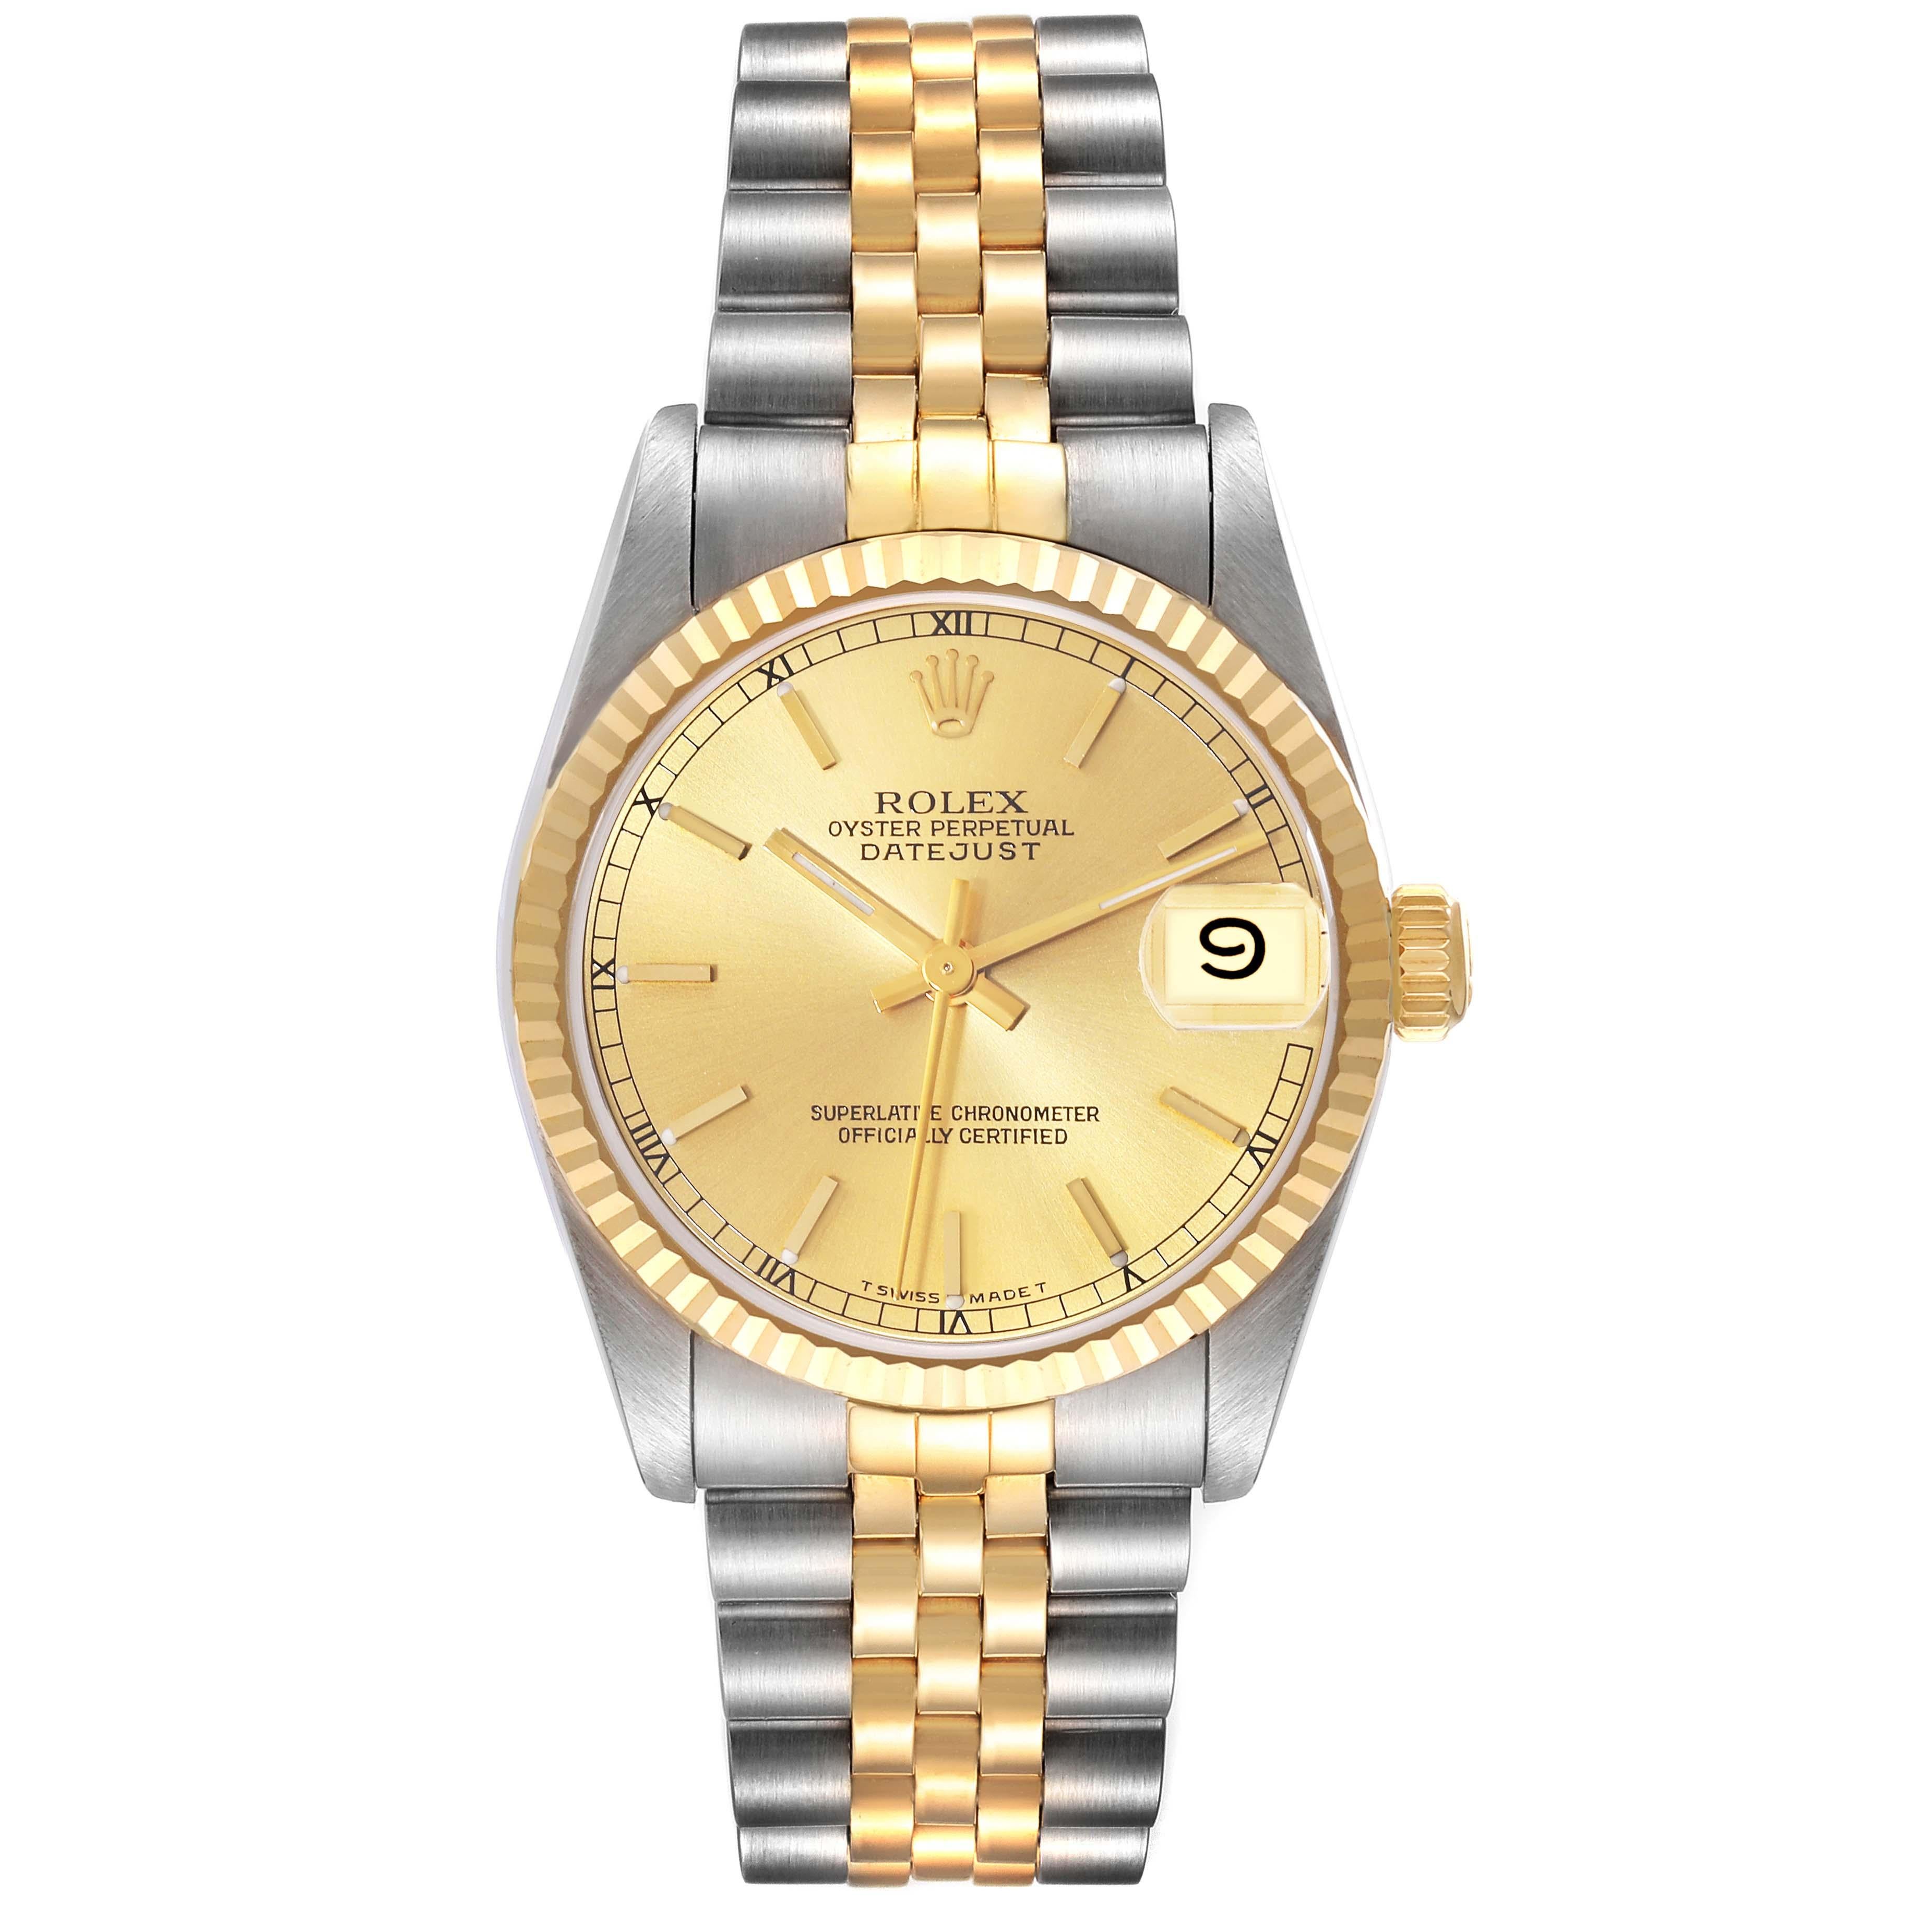 Rolex Datejust Midsize Champagne Dial Steel Yellow Gold Ladies Watch 68273. Officially certified chronometer automatic self-winding movement. Stainless steel oyster case 31 mm in diameter. Rolex logo on an 18K yellow gold crown. 18k yellow gold